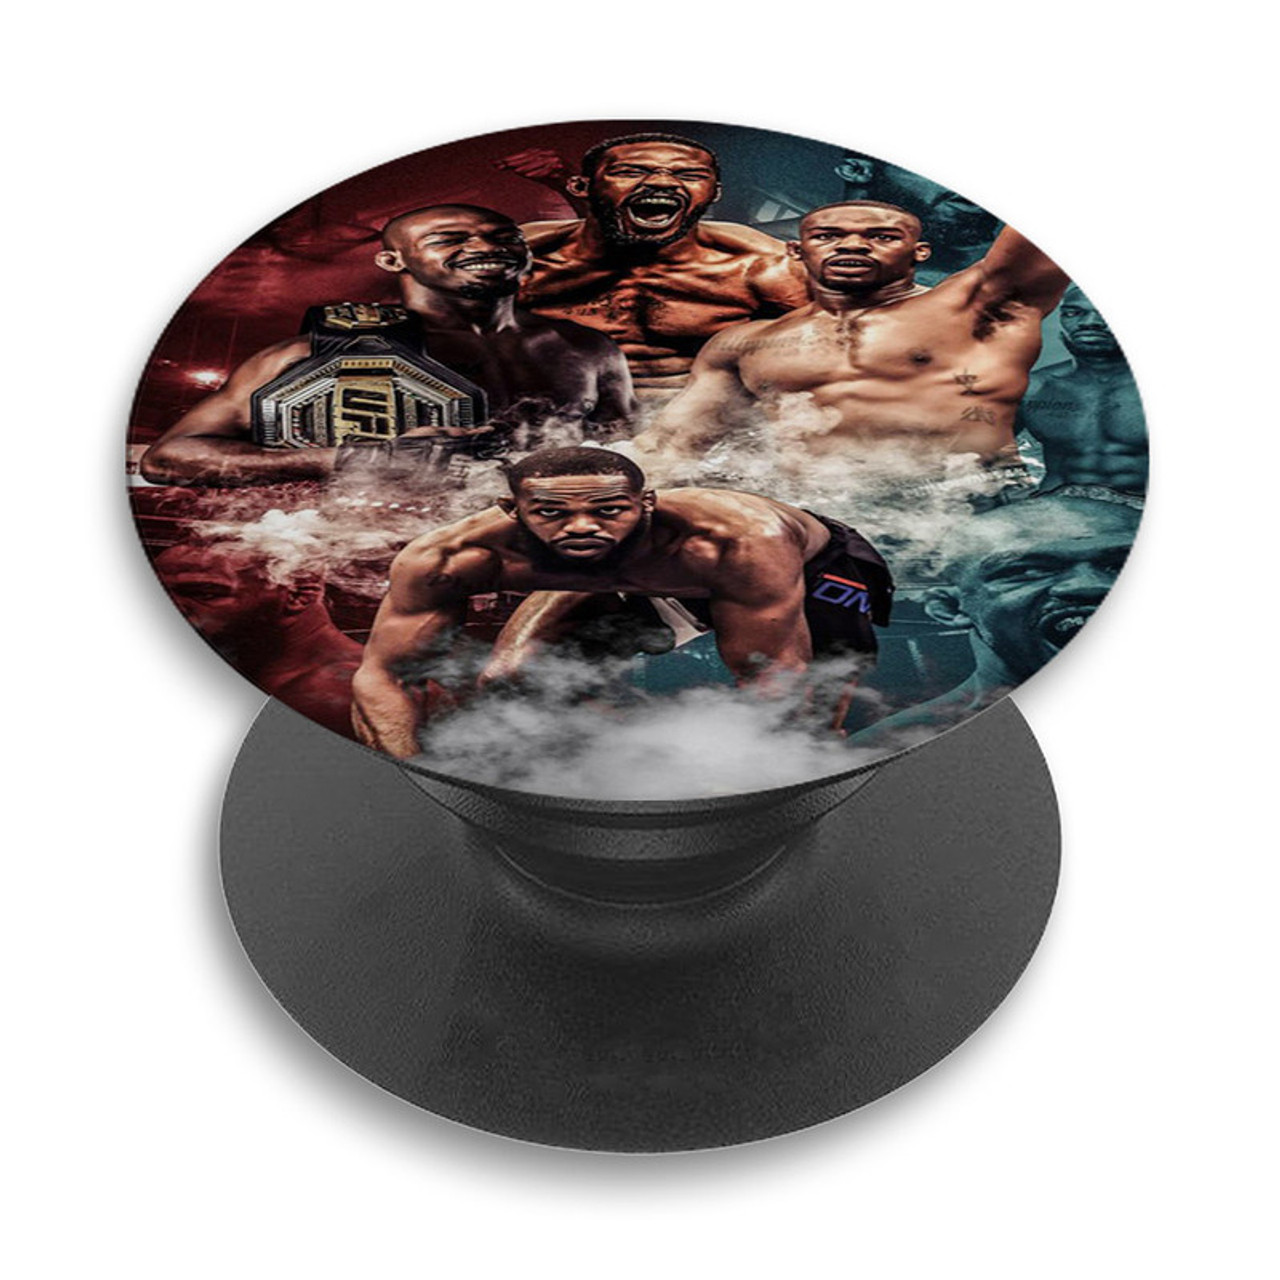 Pastele Jon Jones UFC MMA Custom PopSockets Awesome Personalized Phone Grip  Holder Pop Up Stand Out